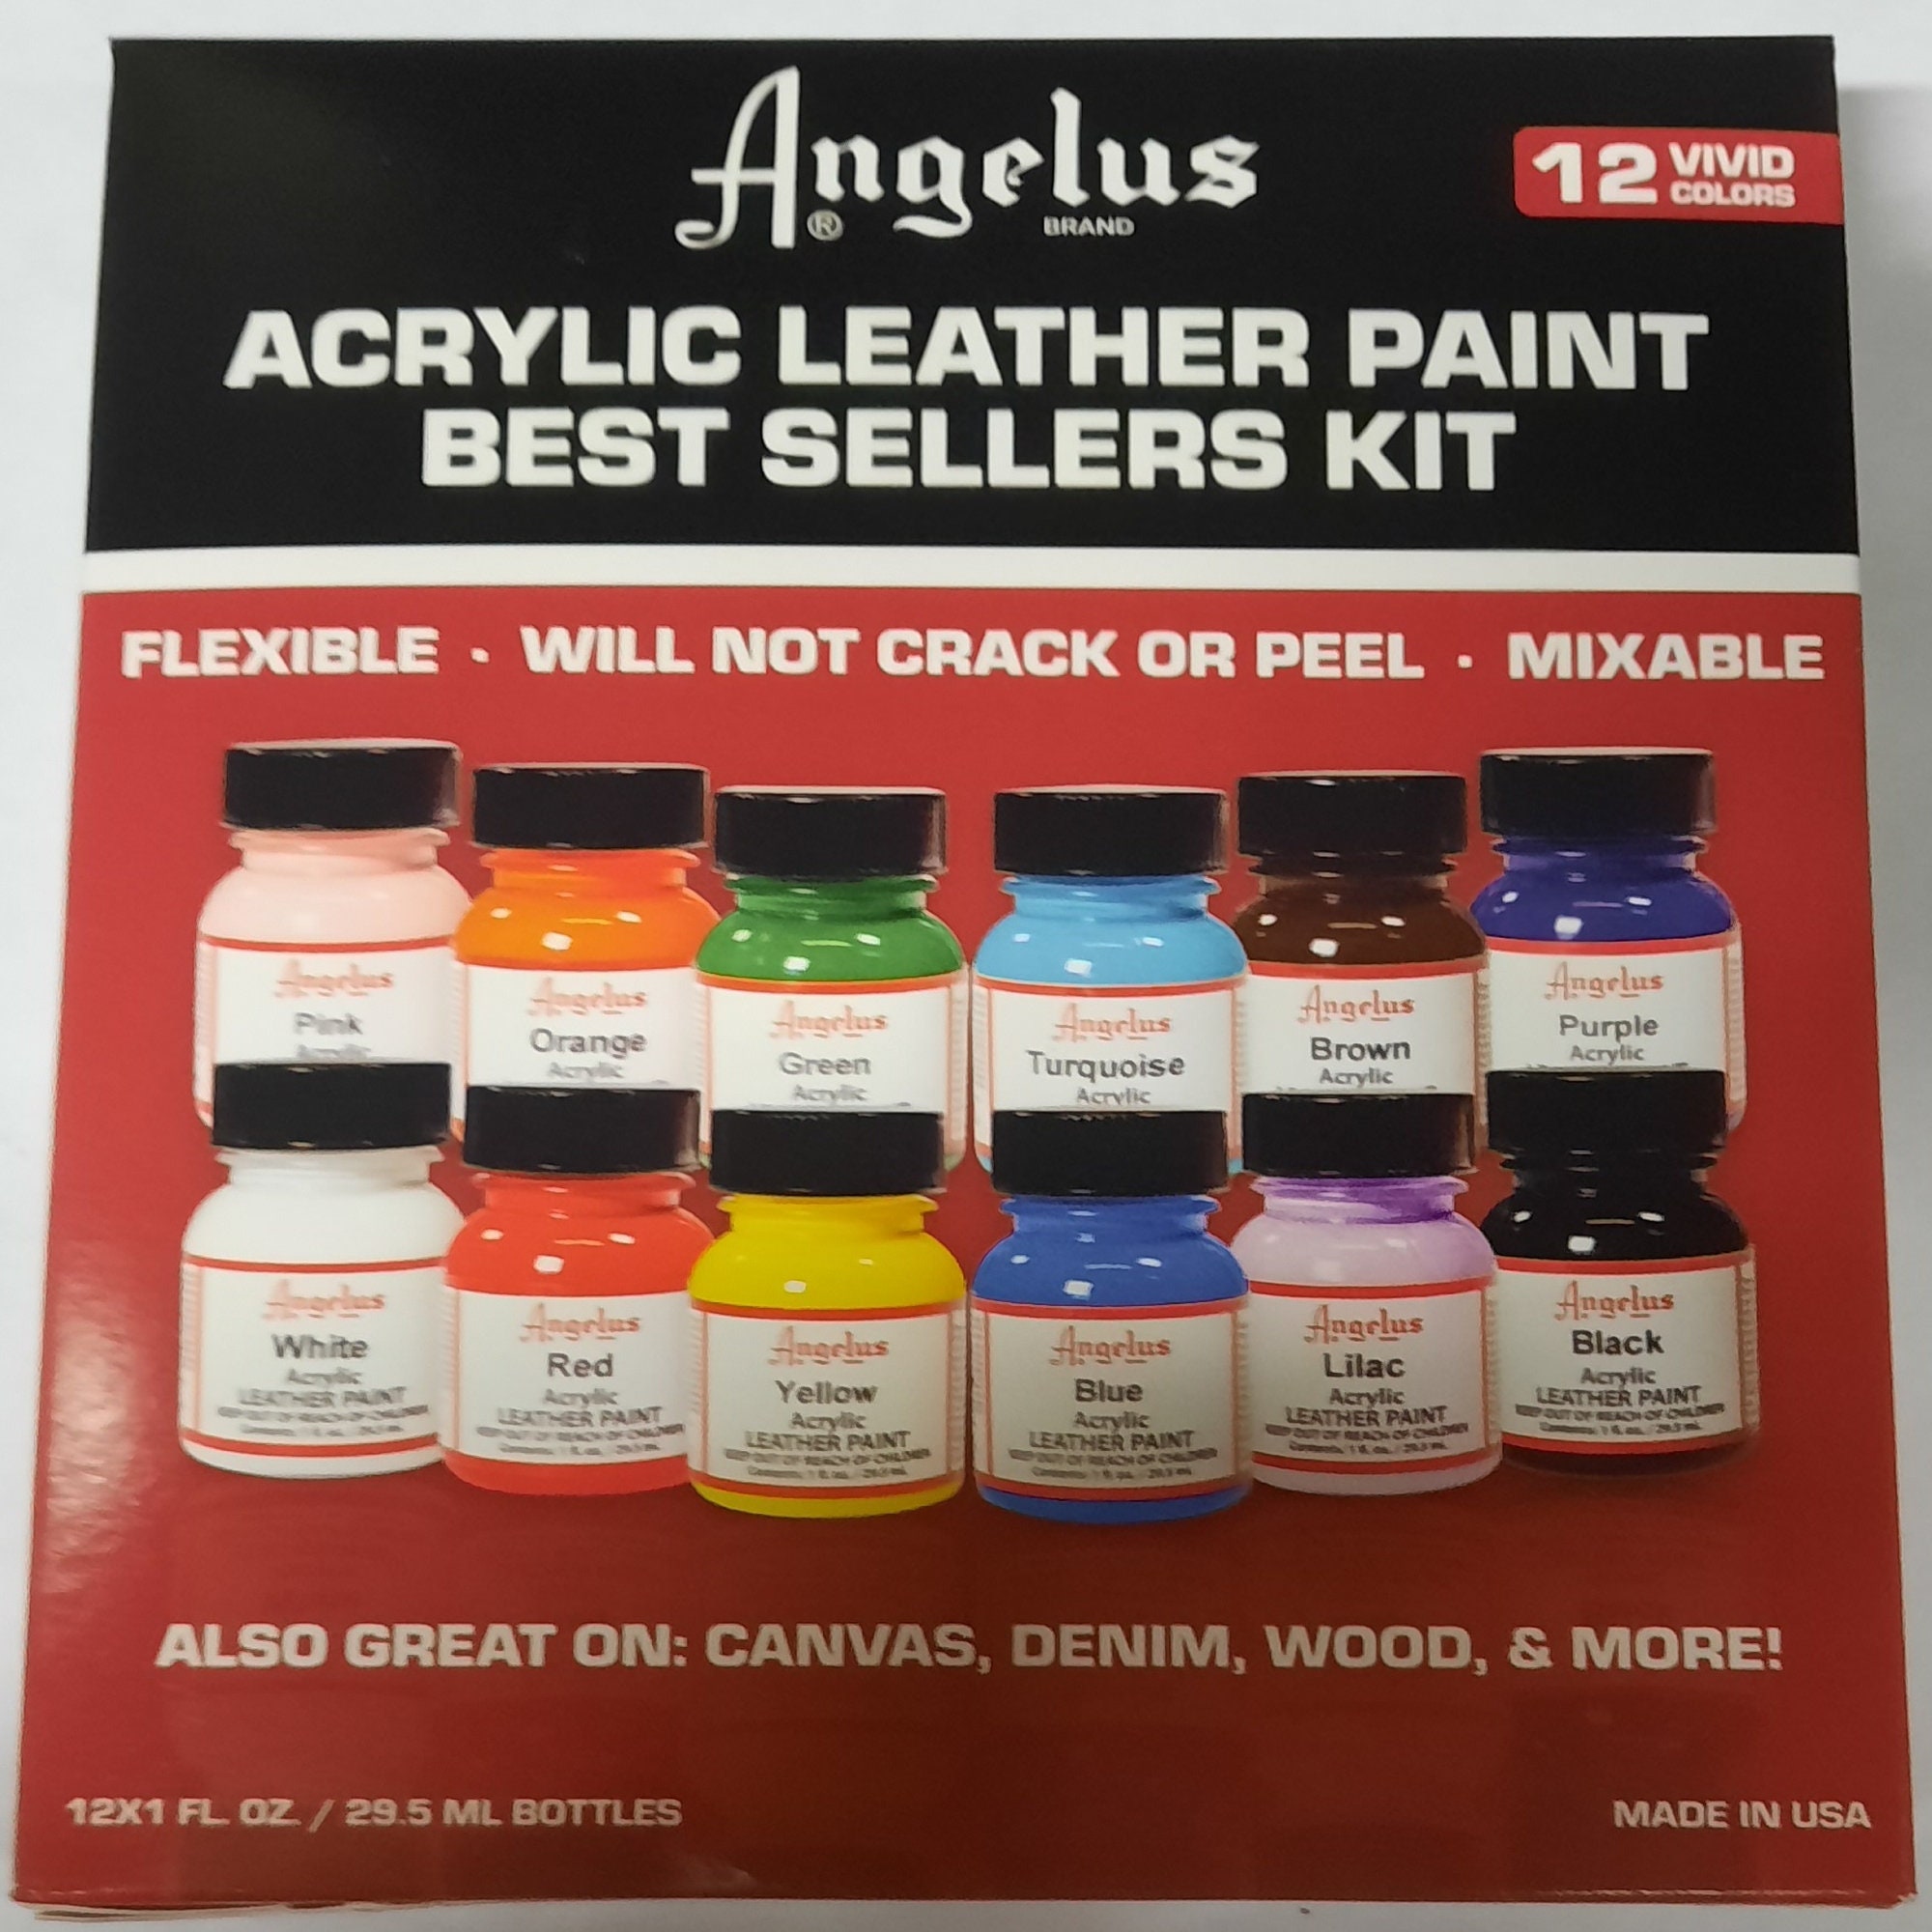 Acrylic Leather Paint For Shoes & Leather Accessories - Premium Shoe Paint  Kit For Sneakers, Bags, Purses & More - Waterproof, Flexible, Long-lasting  Sneaker Paint Kit, High-quality & Affordable